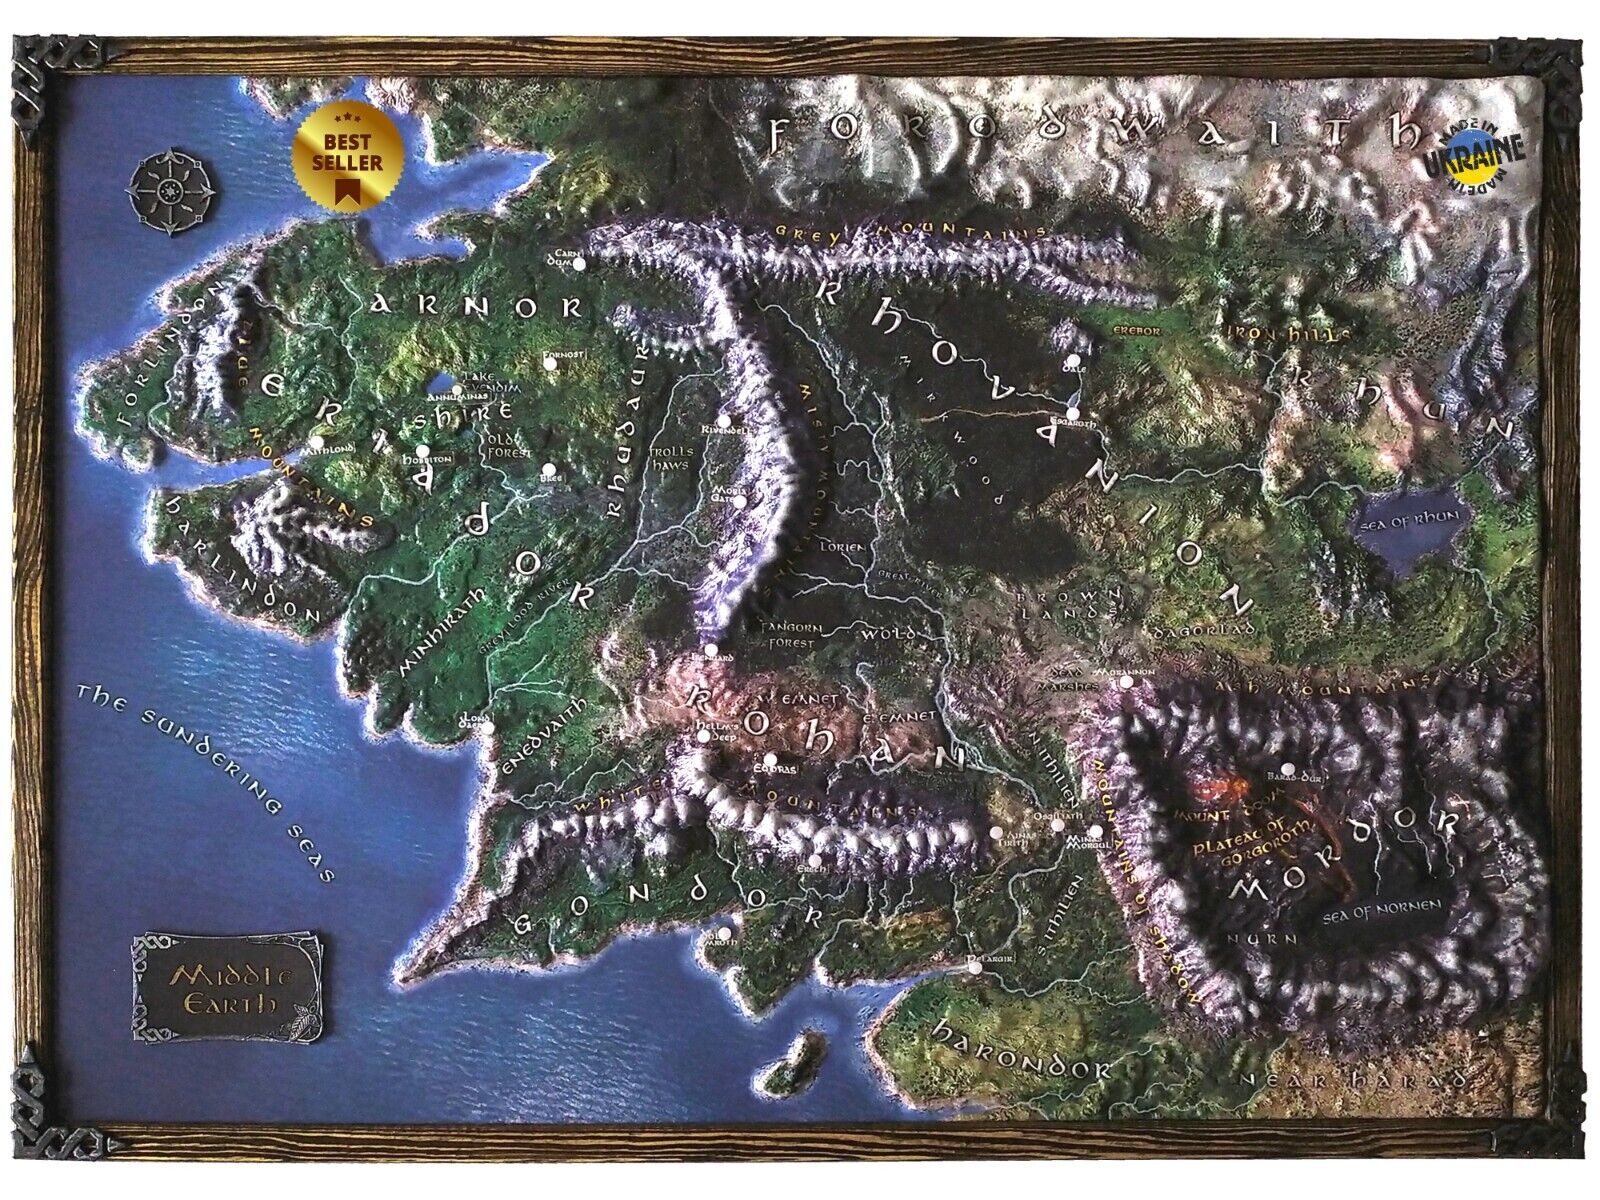 Unique rare 3D map of the Mediterranean The Lord of the Rings handmade